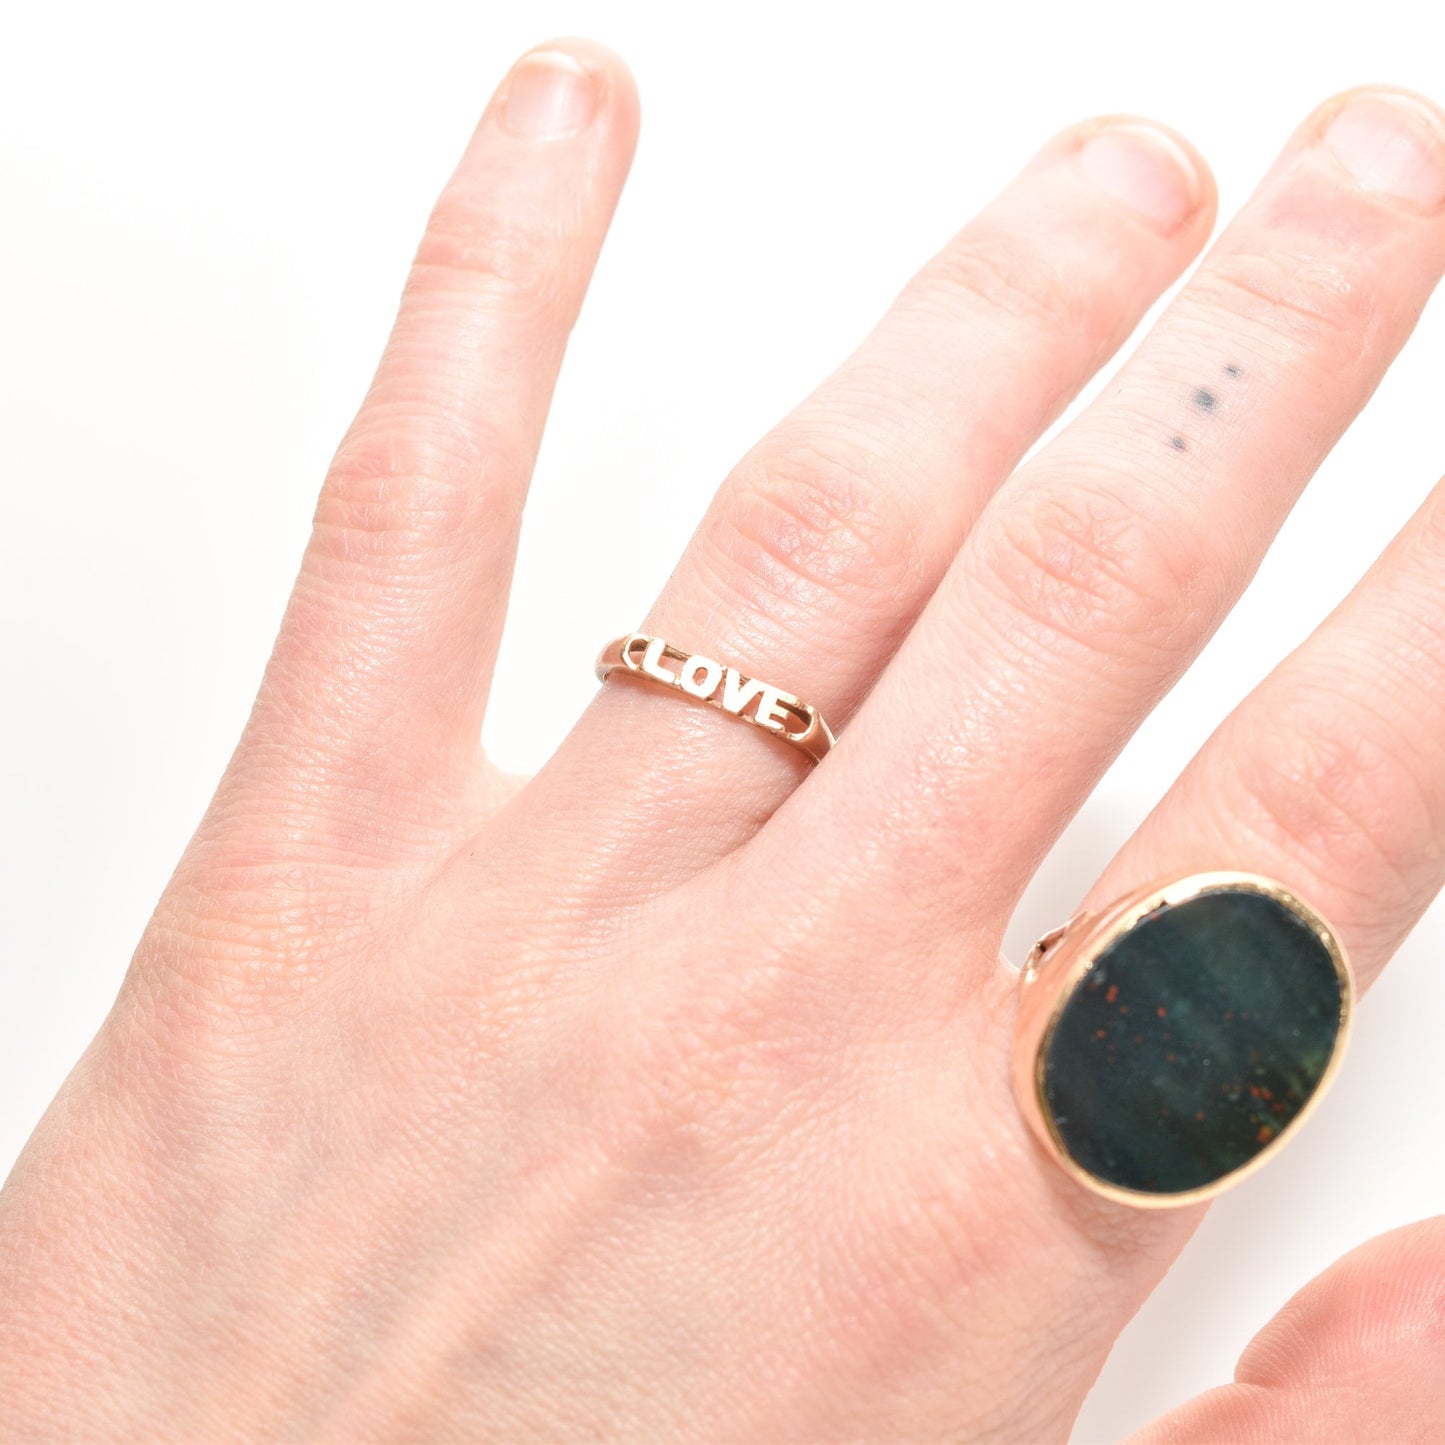 Minimalist 14K yellow gold 'LOVE' ring on a finger, paired with a large oval stone ring, ideal for stacking jewelry, Valentine's Day gift, size 6.75 US